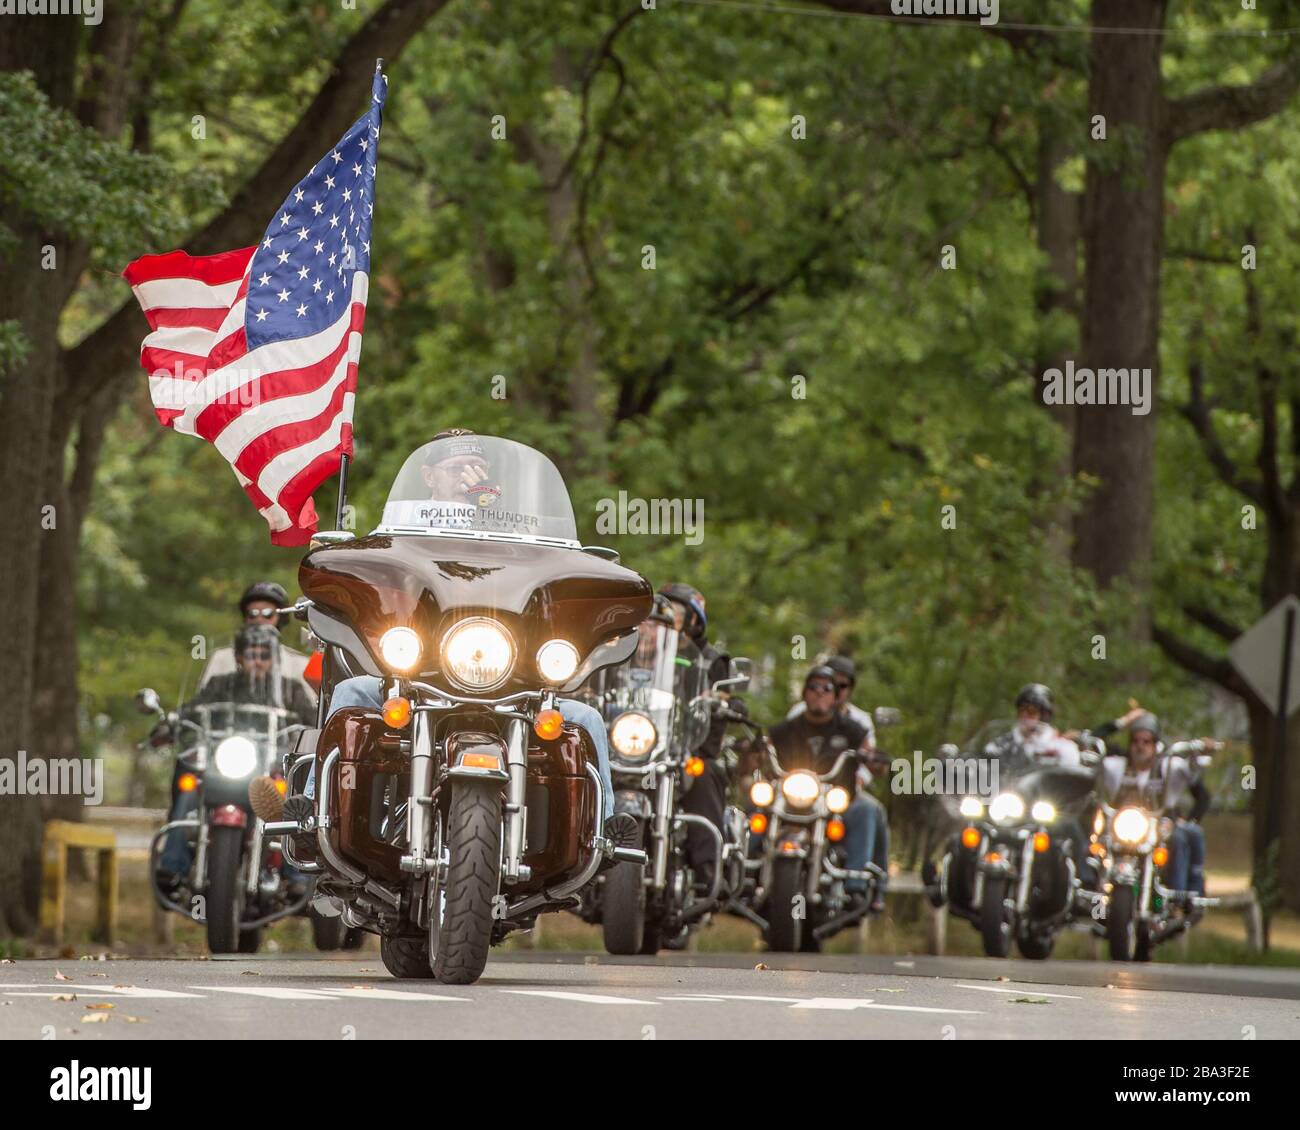 Rolling Thunder rally event with multiple motorcycles and a big American flag leading the way. Stock Photo